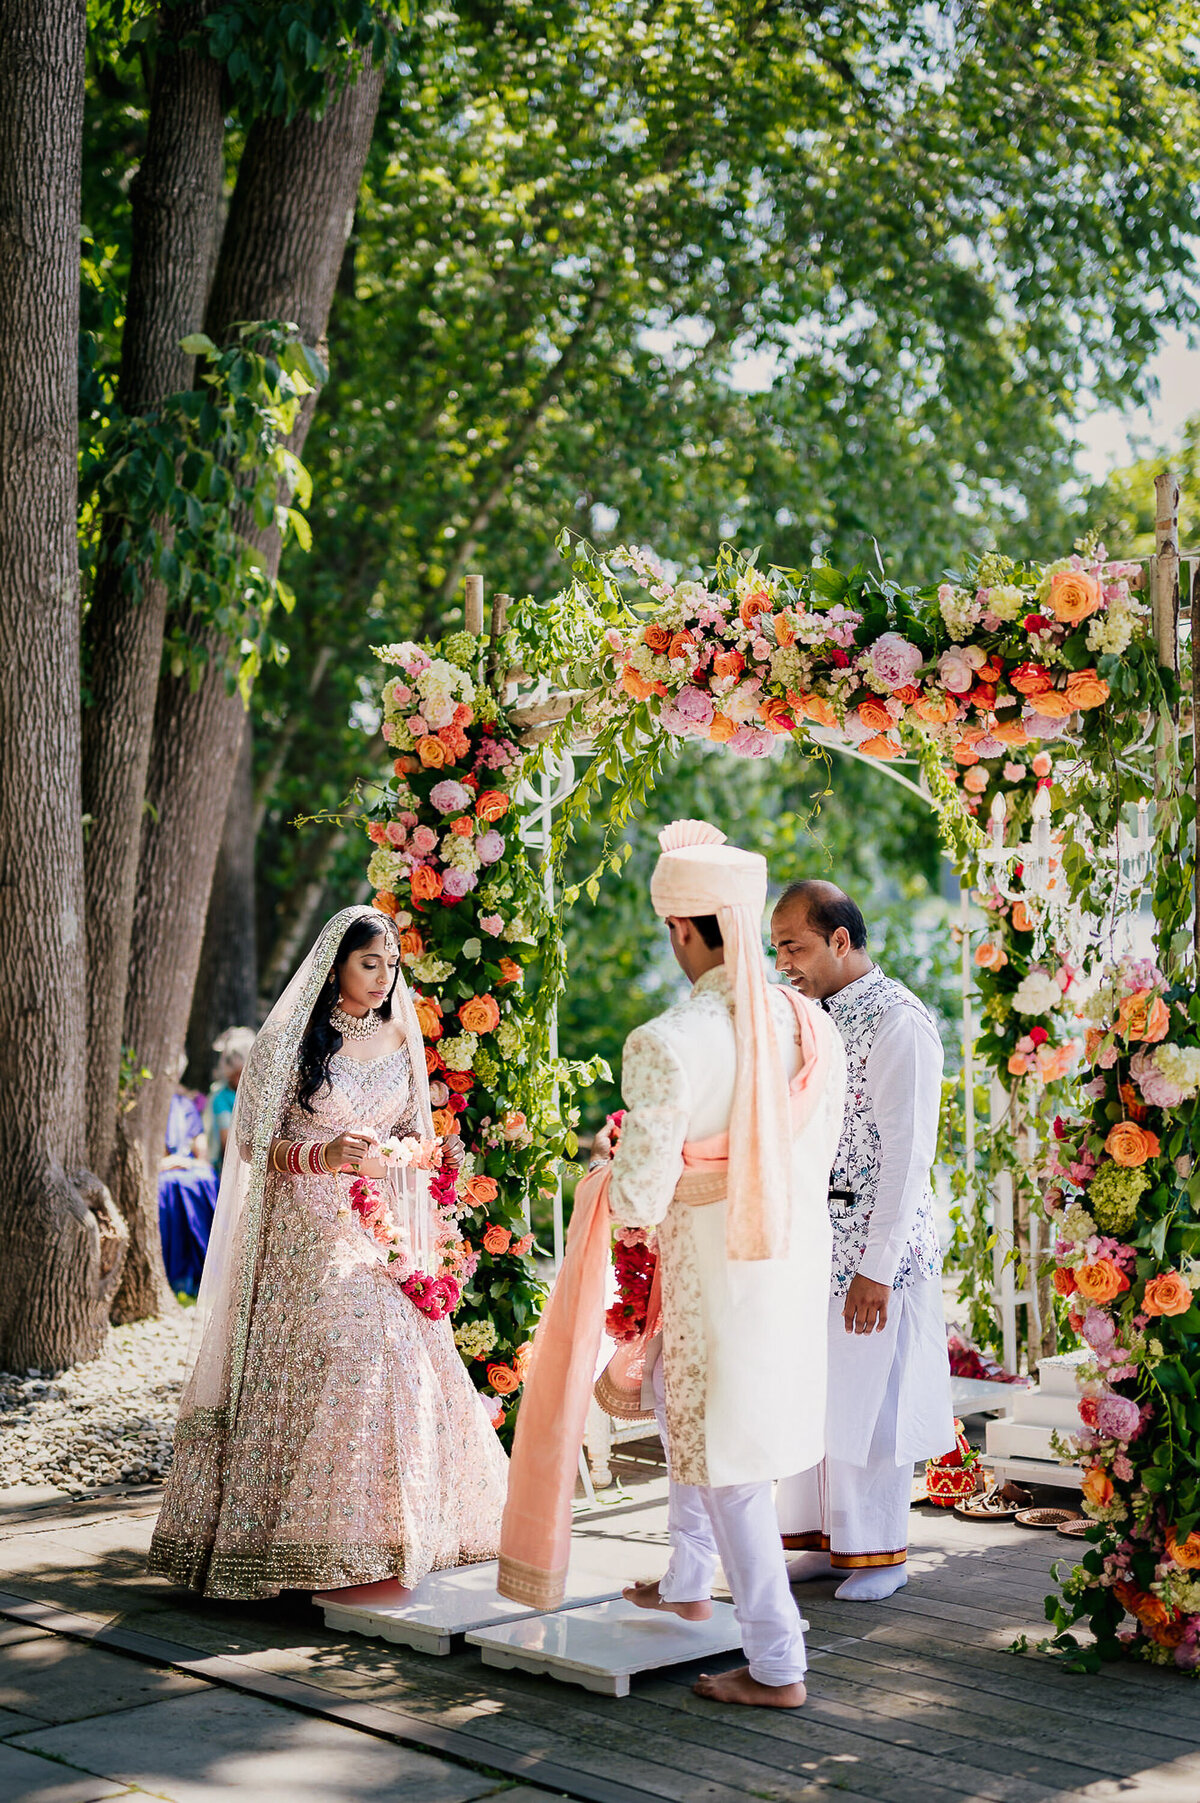 Capture the beauty of Hindu weddings in NJ & NYC with expert photography.